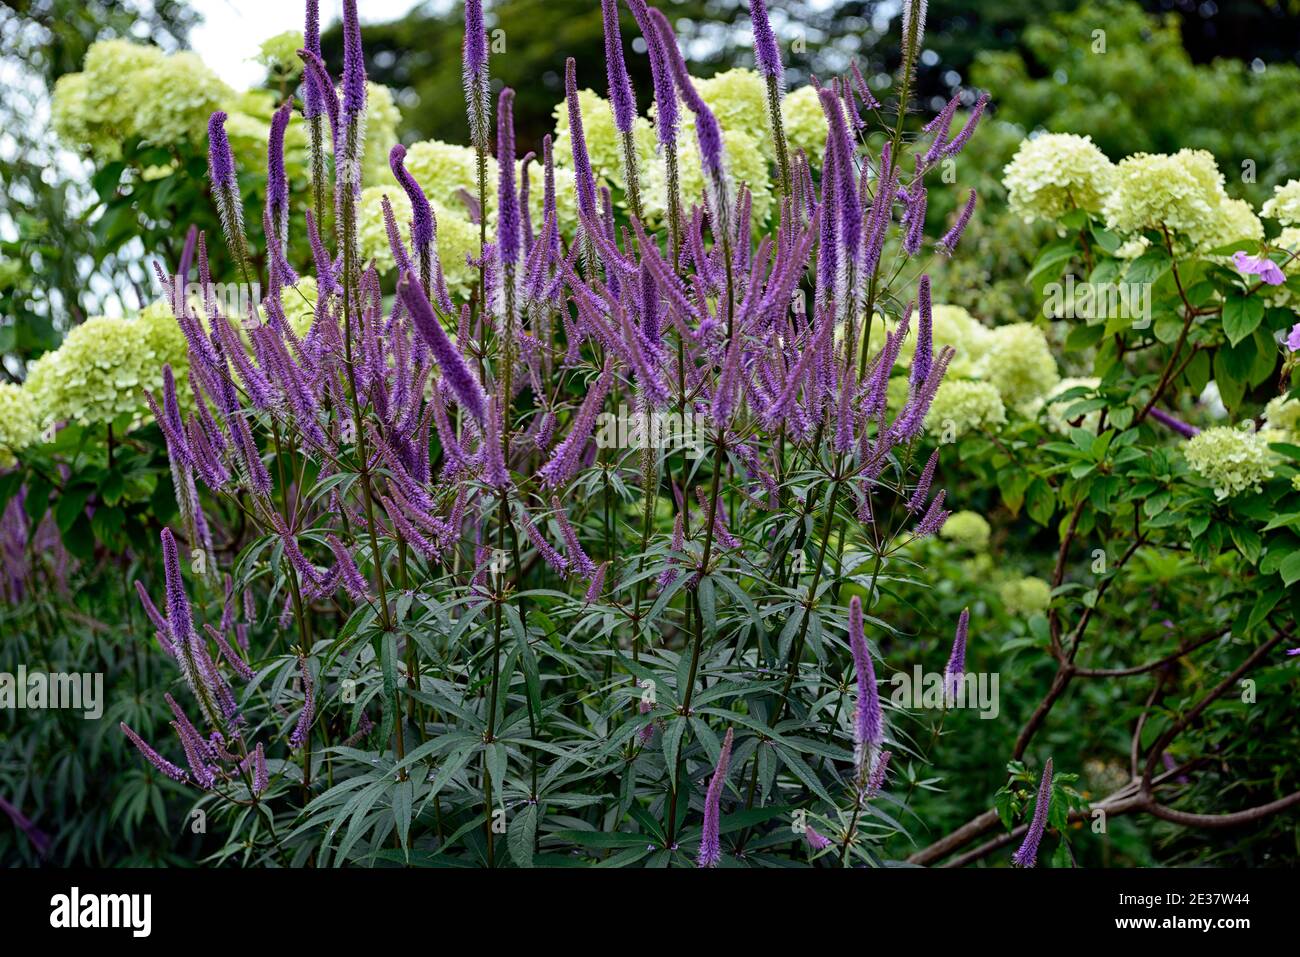 Veronicastrum virginicum fascination,Culver's Root,lilac blue, lilac-blue racemes,flowers,flowering,stems,RM Floral Stock Photo